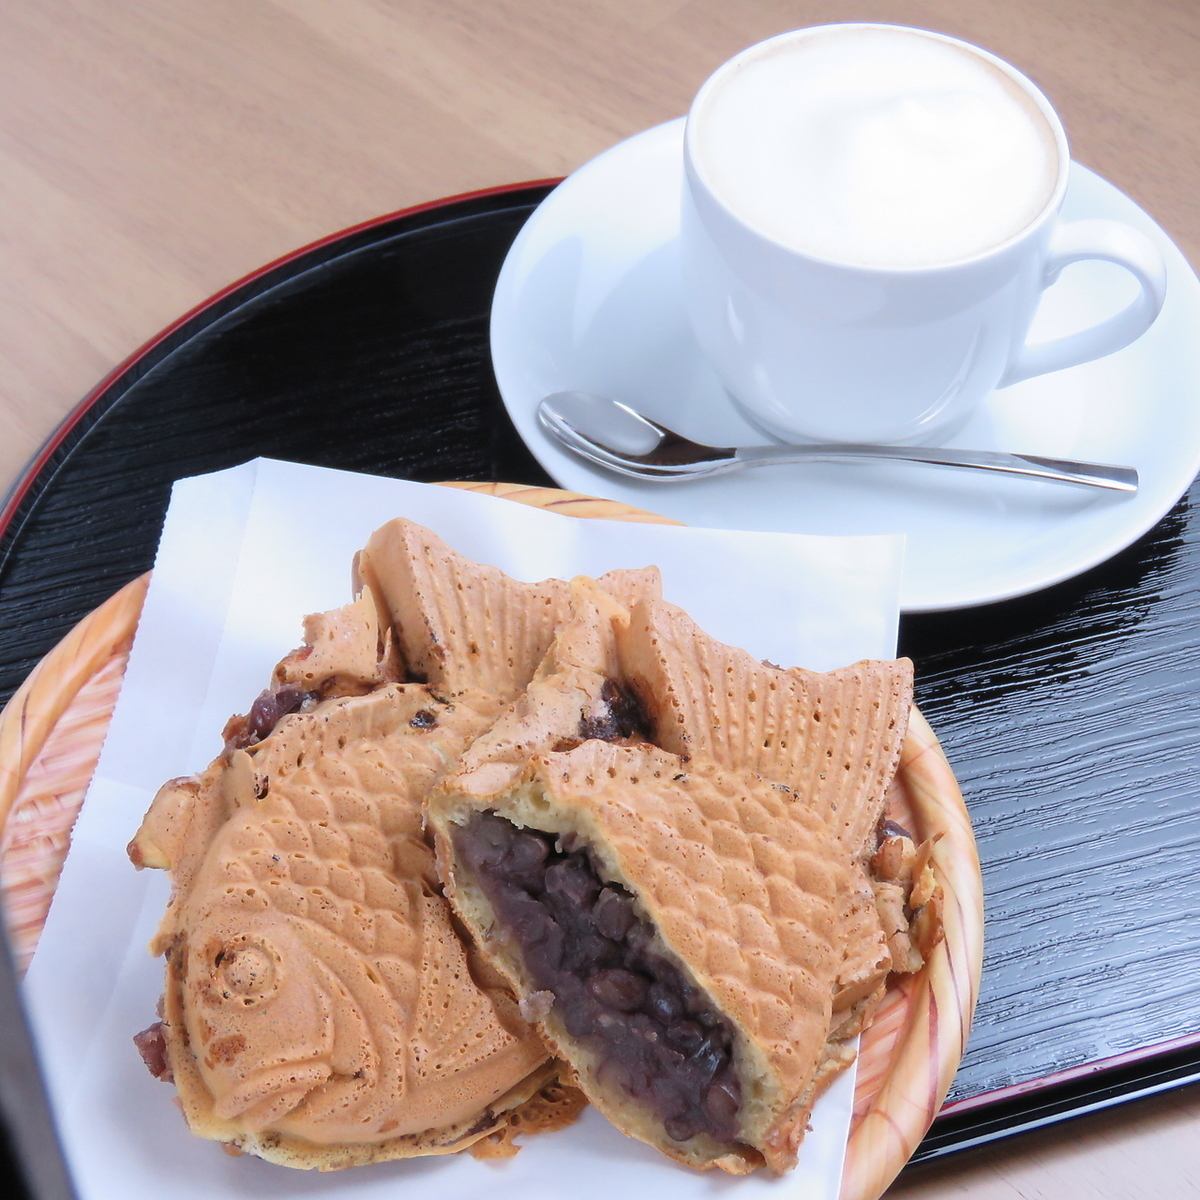 [Taiyaki] We are particular about the materials and handmade.